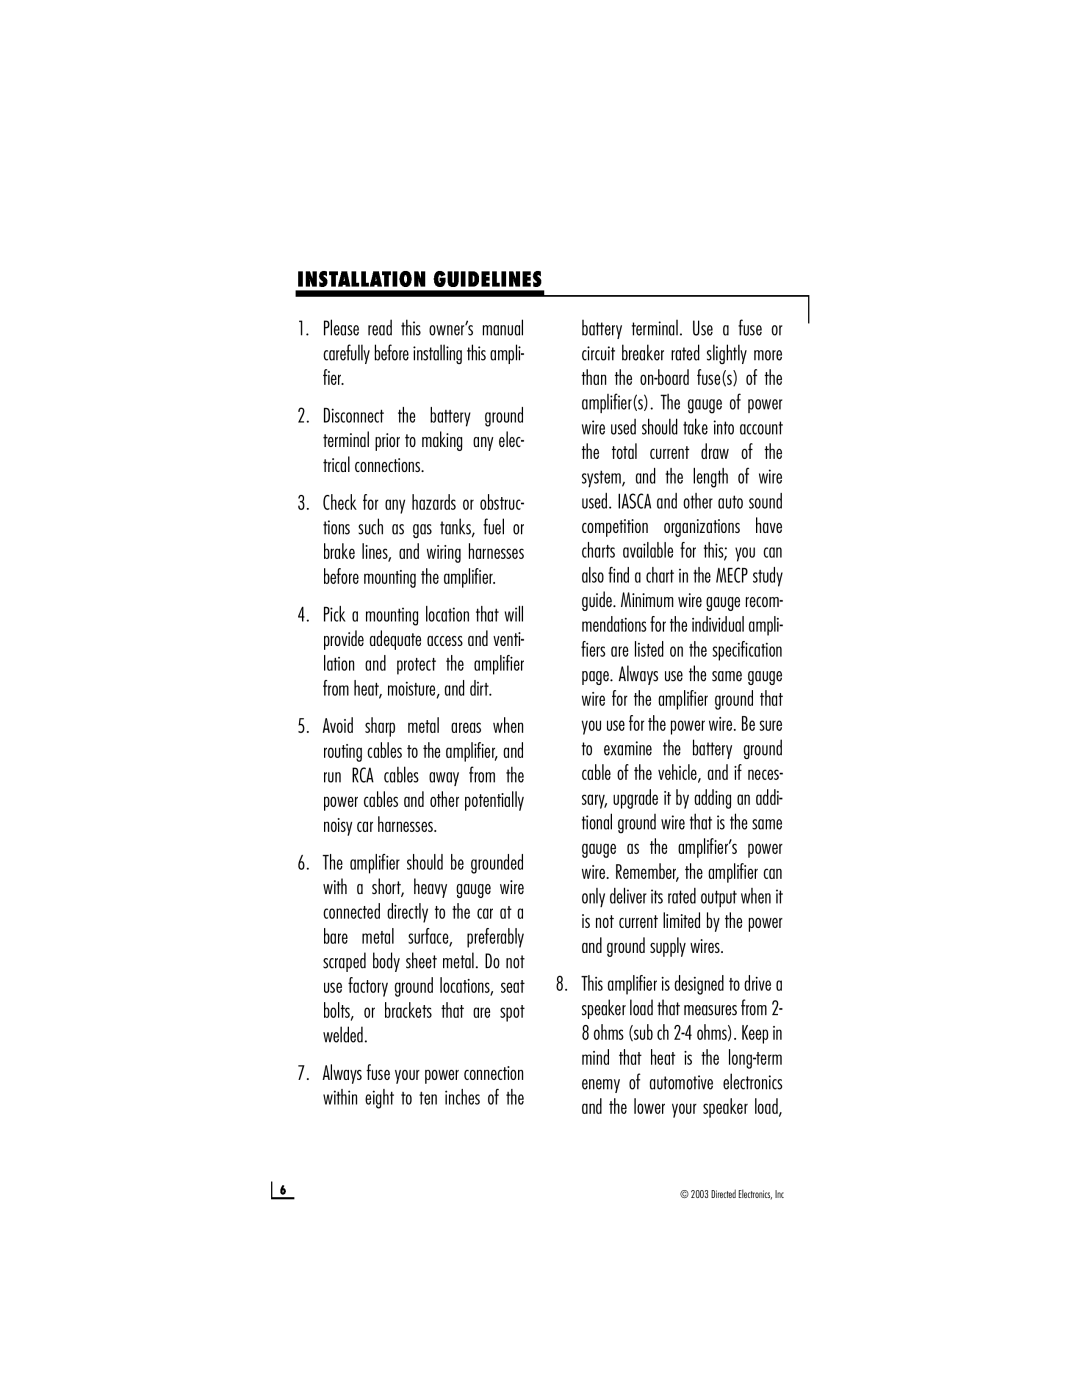 Directed Electronics 600/5 manual Installation Guidelines 